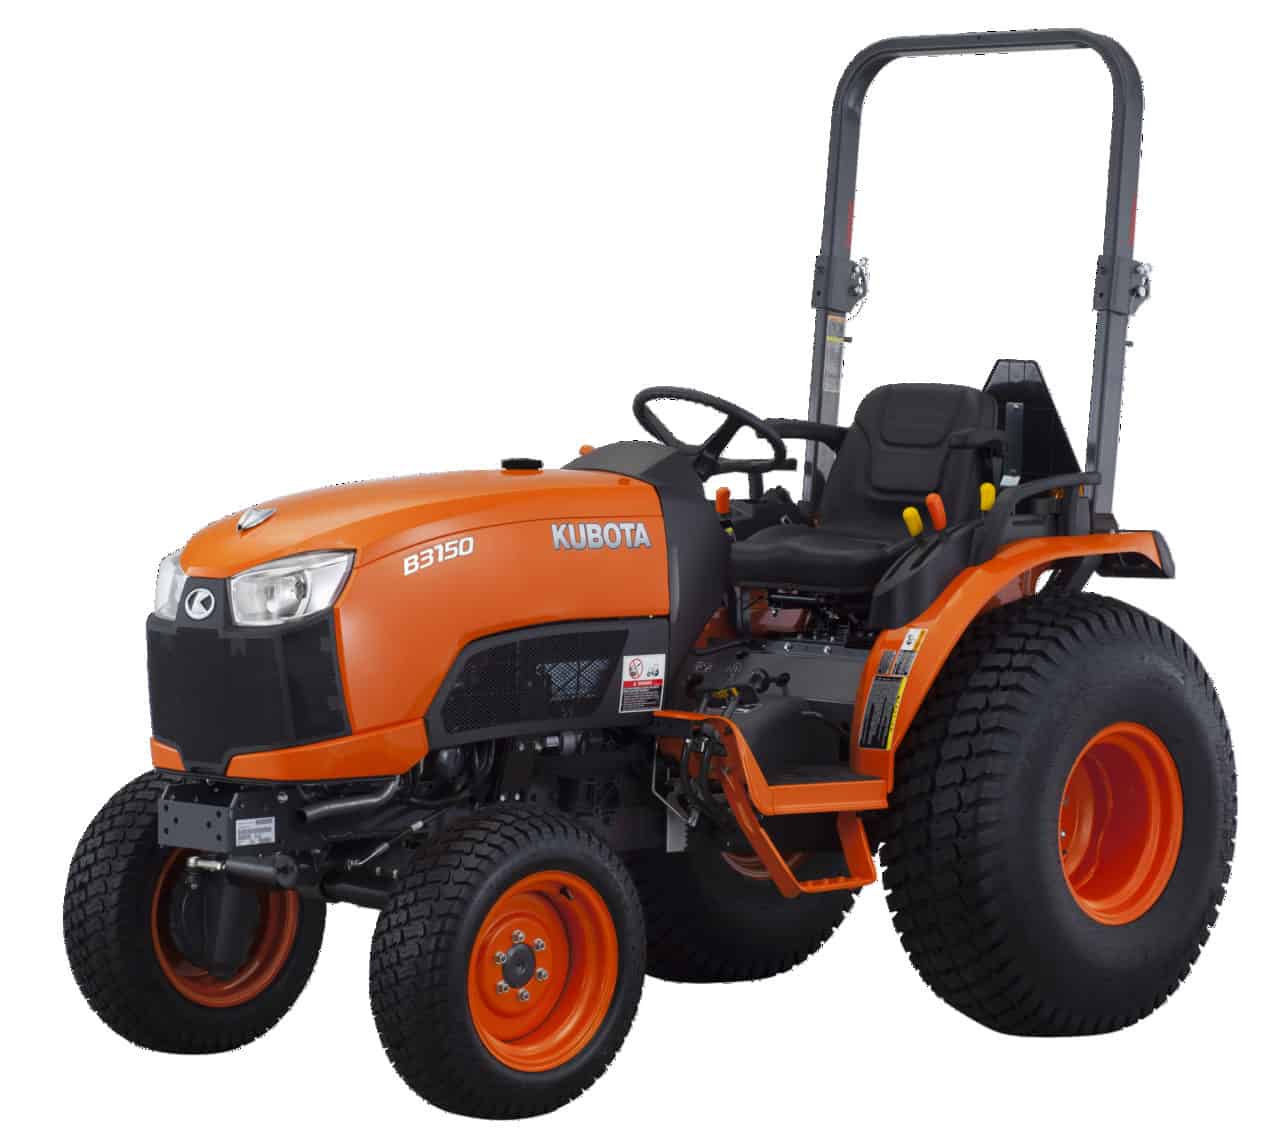 Discover Top Kubota Tractor Accessories in Our Catalog